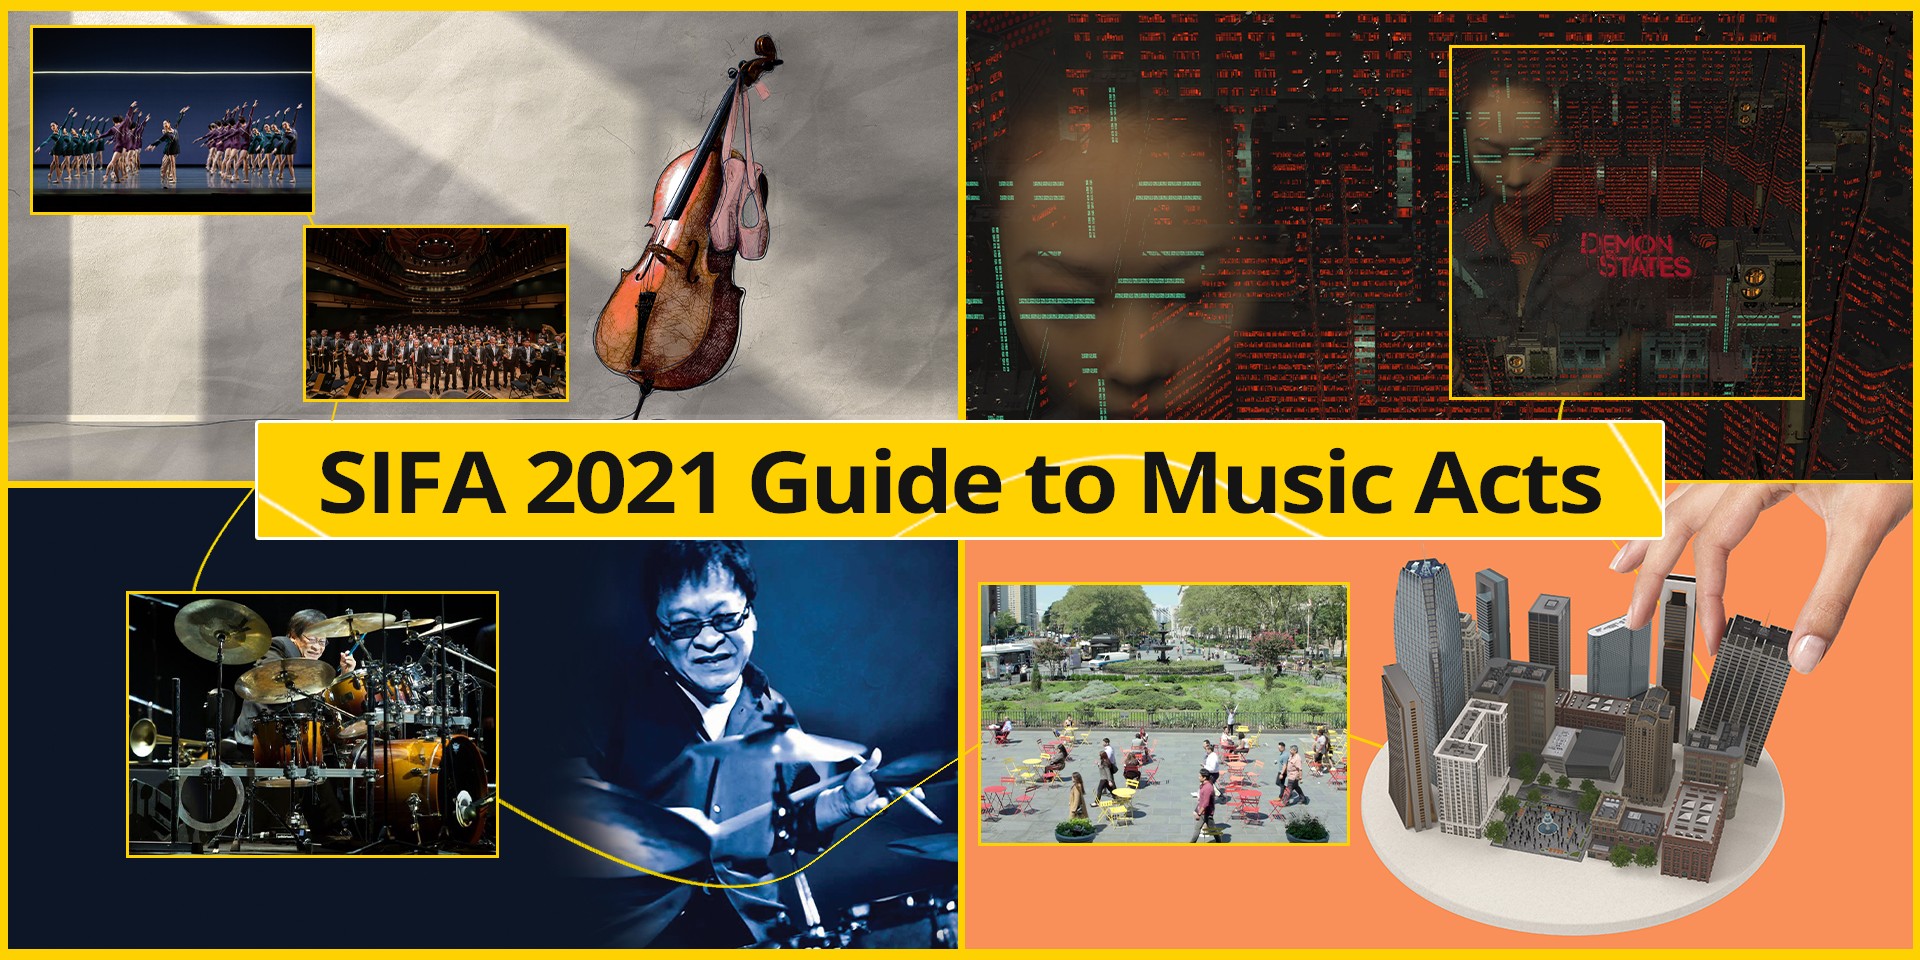 From virtual reality tours to jazz concerts, here's a musical guide to SIFA 2021